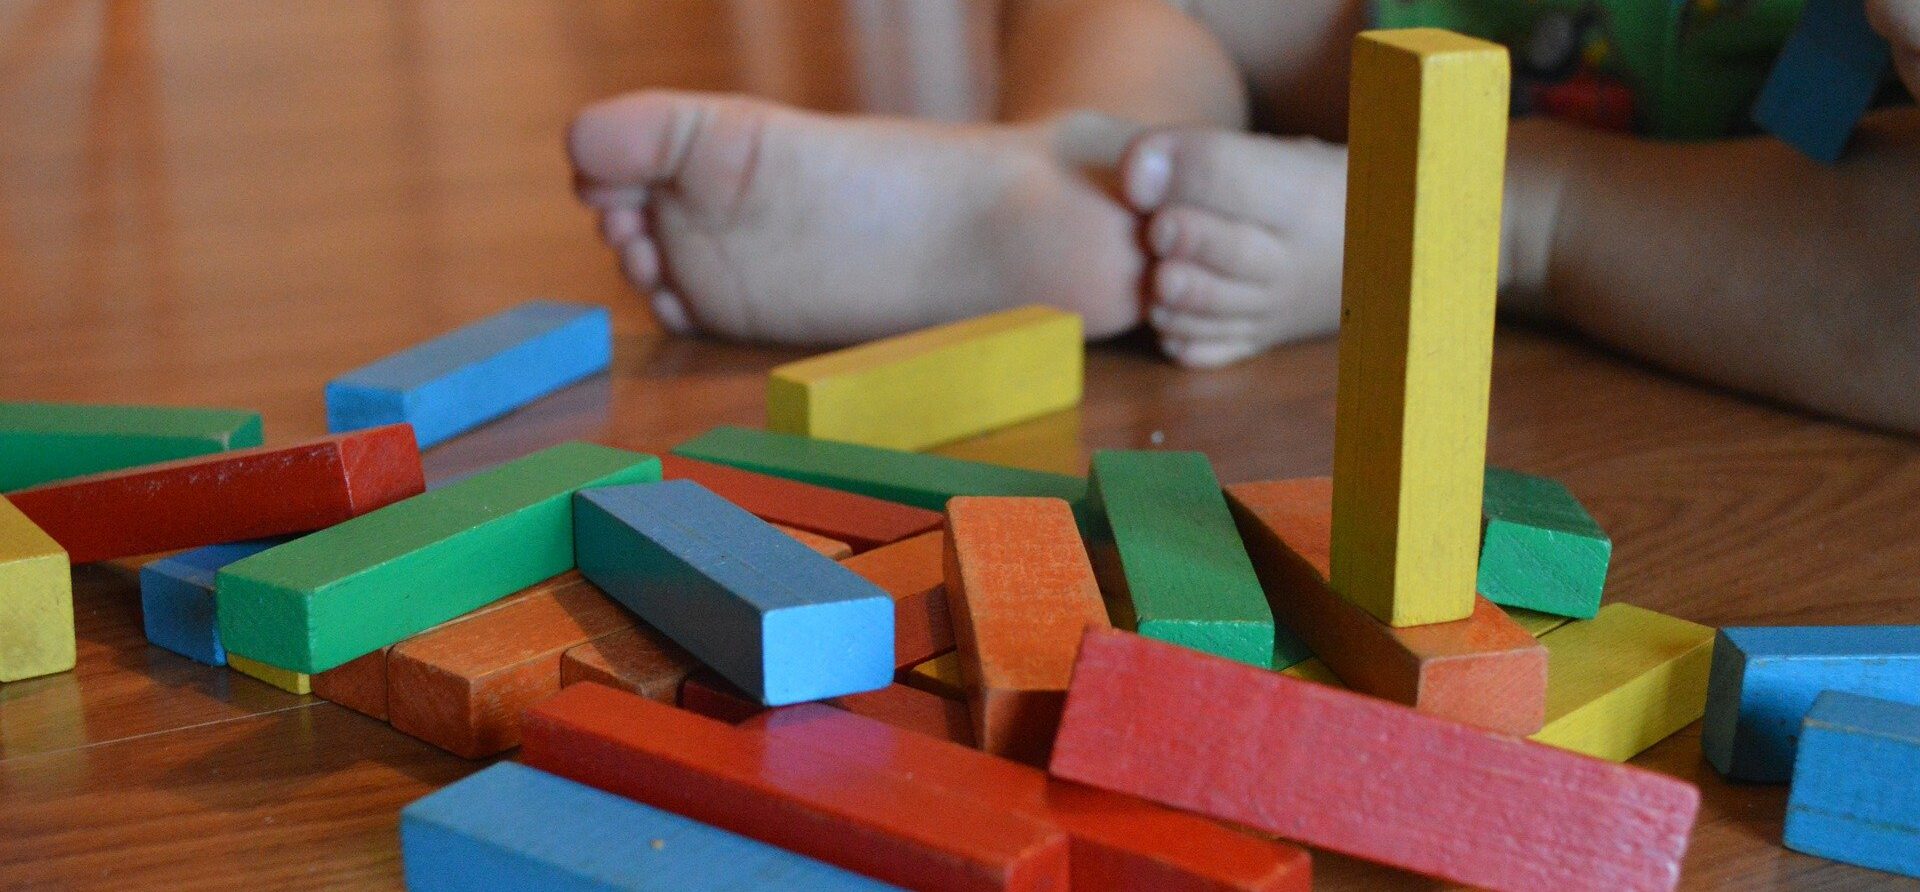 Small child playing on the floor with colorful blocks